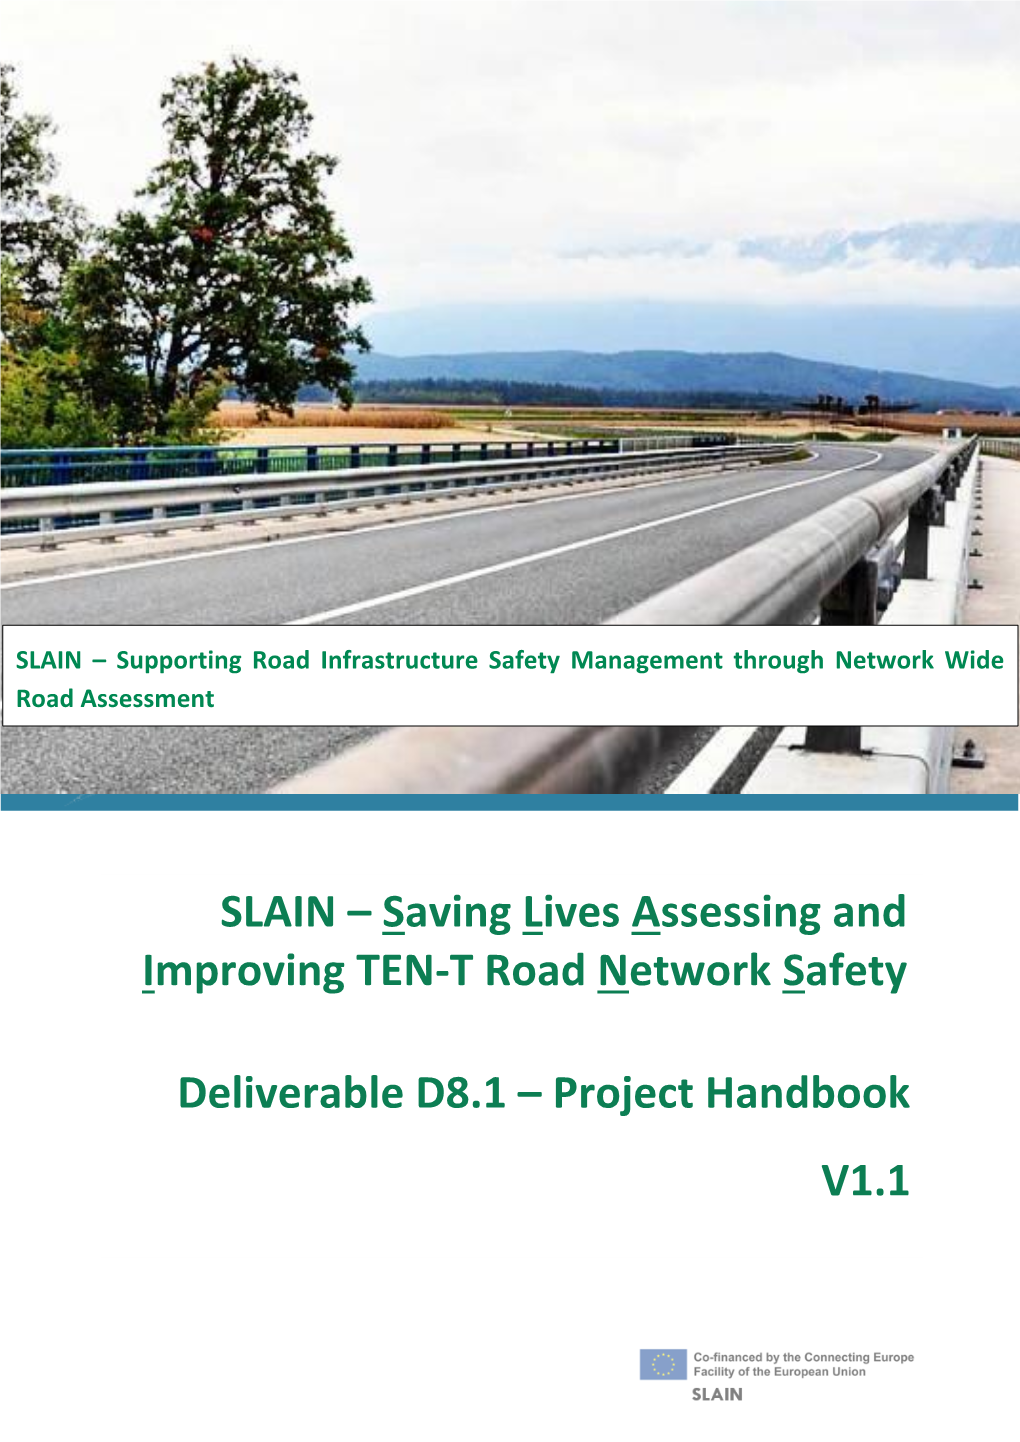 SLAIN – Saving Lives Assessing and Improving TEN-T Road Network Safety